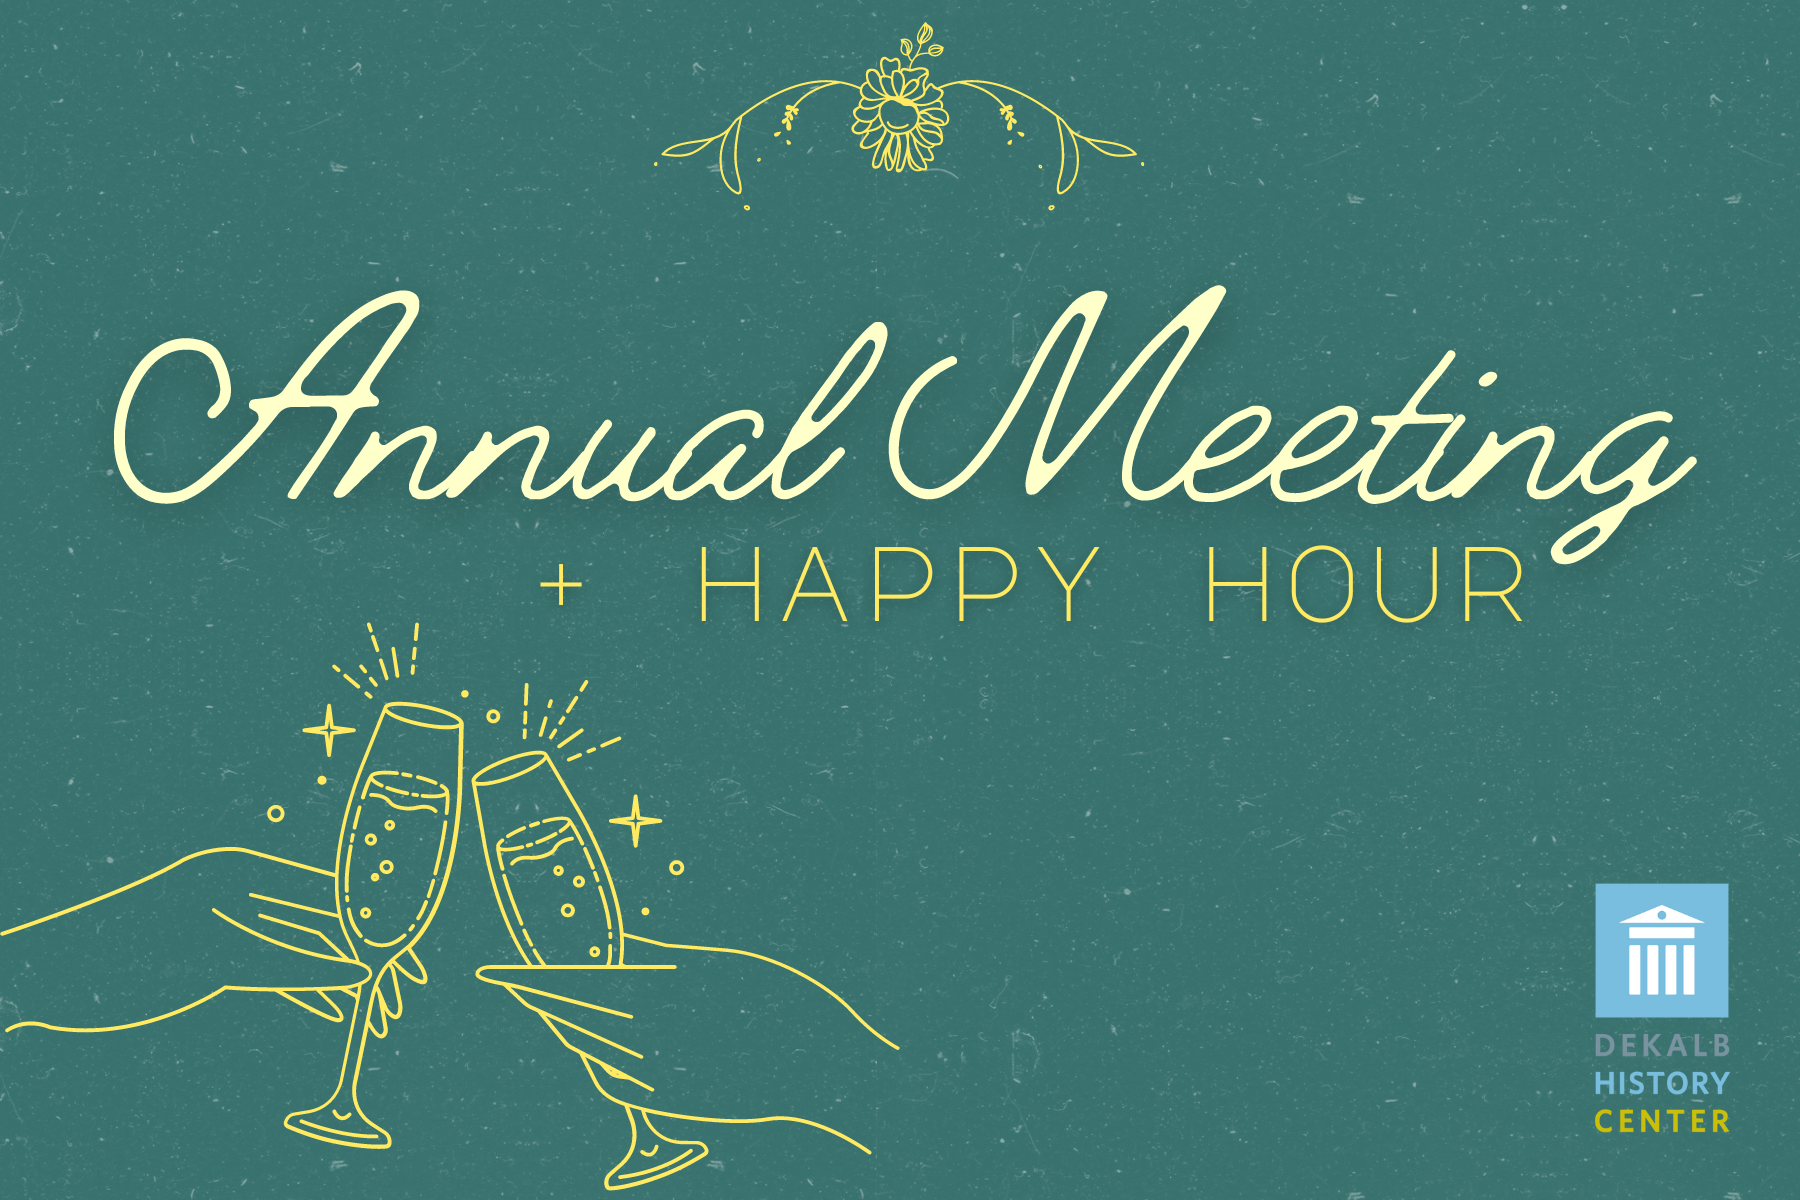 Join fellow DHC Members at this year's Annual Meeting